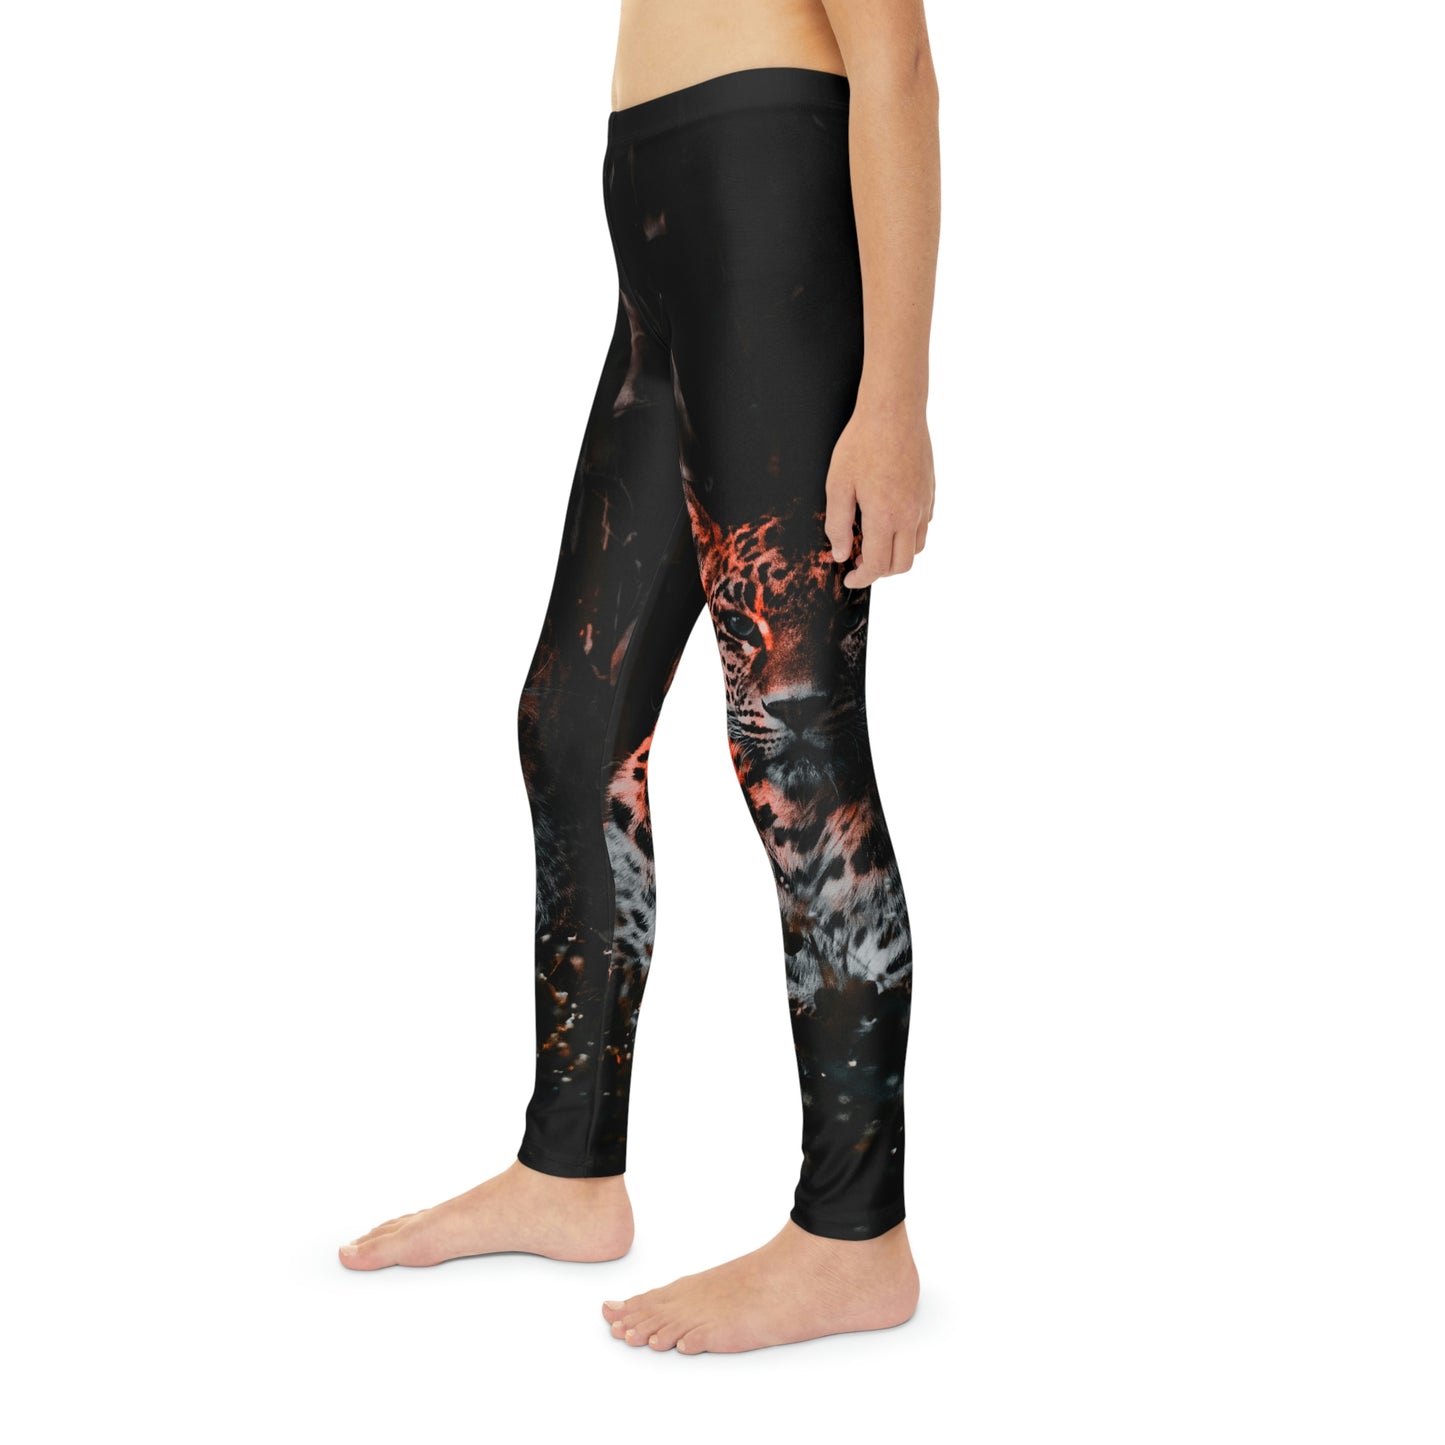 Tiger animal kingdom, Safari Youth Leggings, One of a Kind Gift - Workout Activewear tights for kids, Granddaughter, Niece Christmas Gift